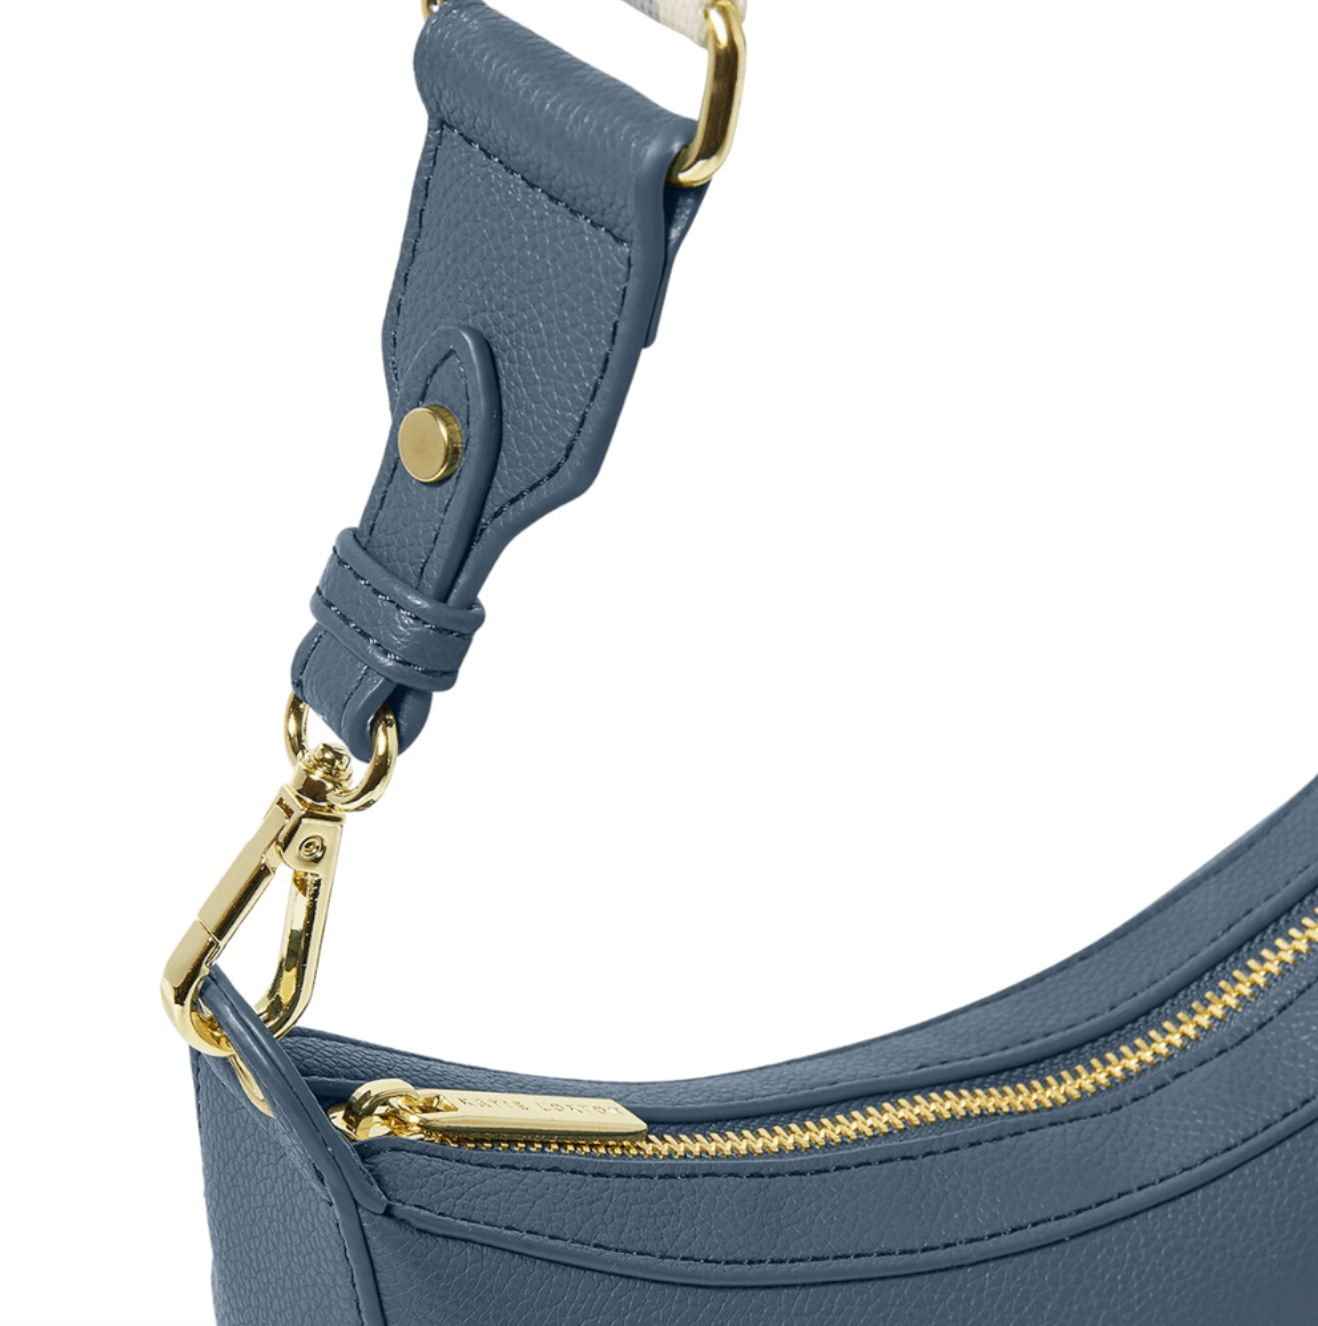 close up of Katie Loxton marni scoop handbag in navy. It shows the bag hardware; a gold zip and strap clips.